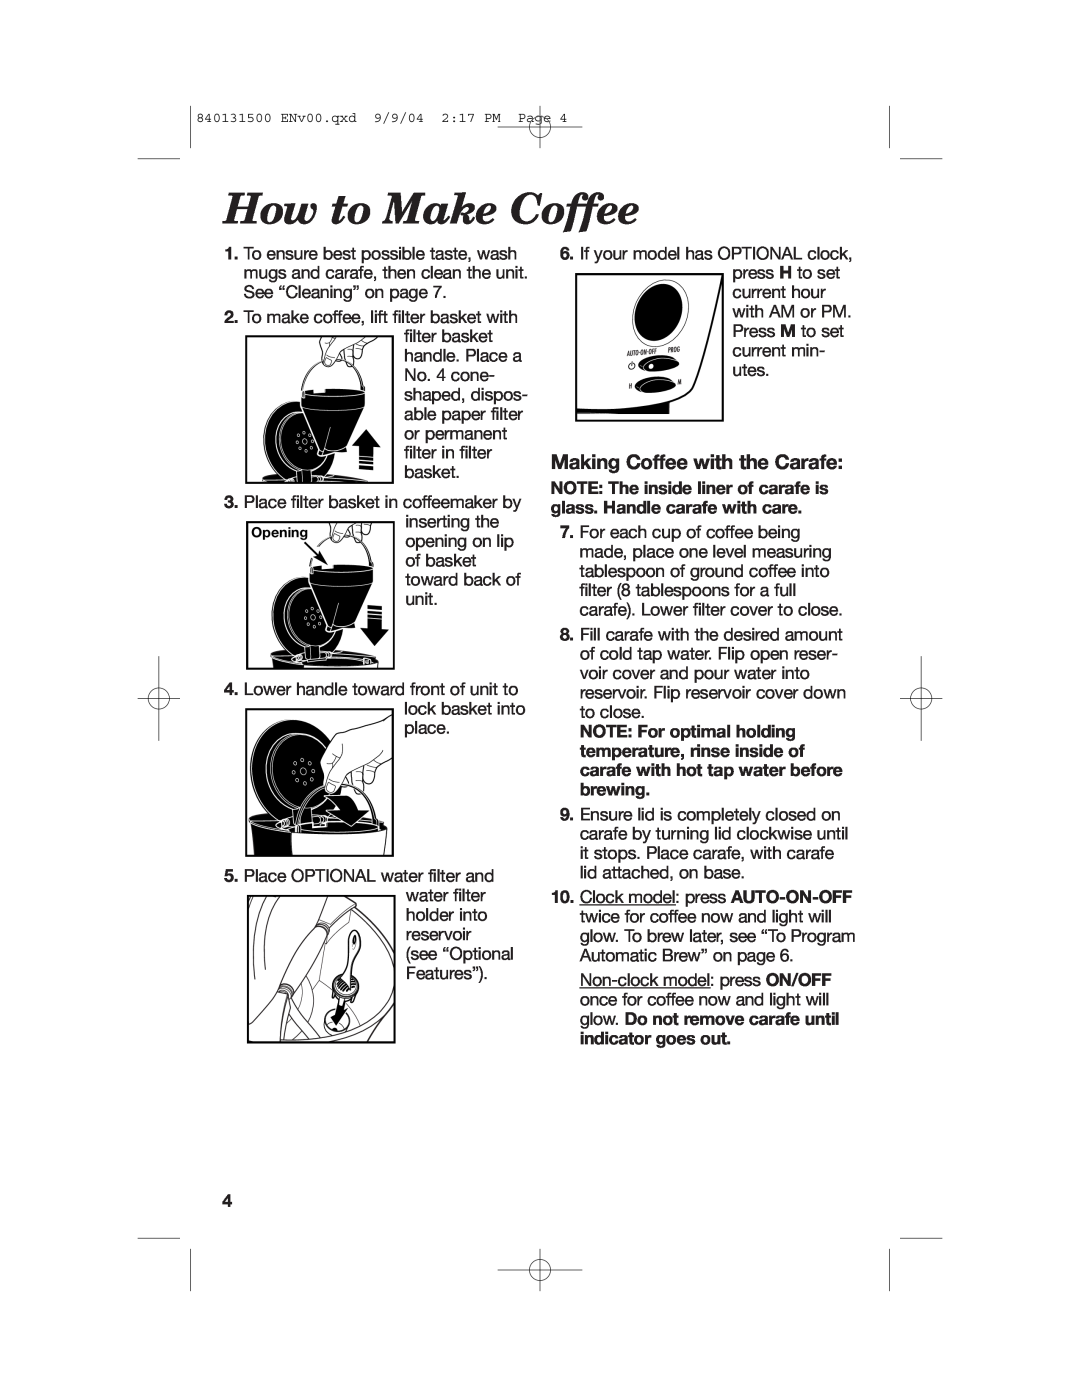 Hamilton Beach 45234, 45114, 45214 manual How to Make Coffee, Making Coffee with the Carafe 